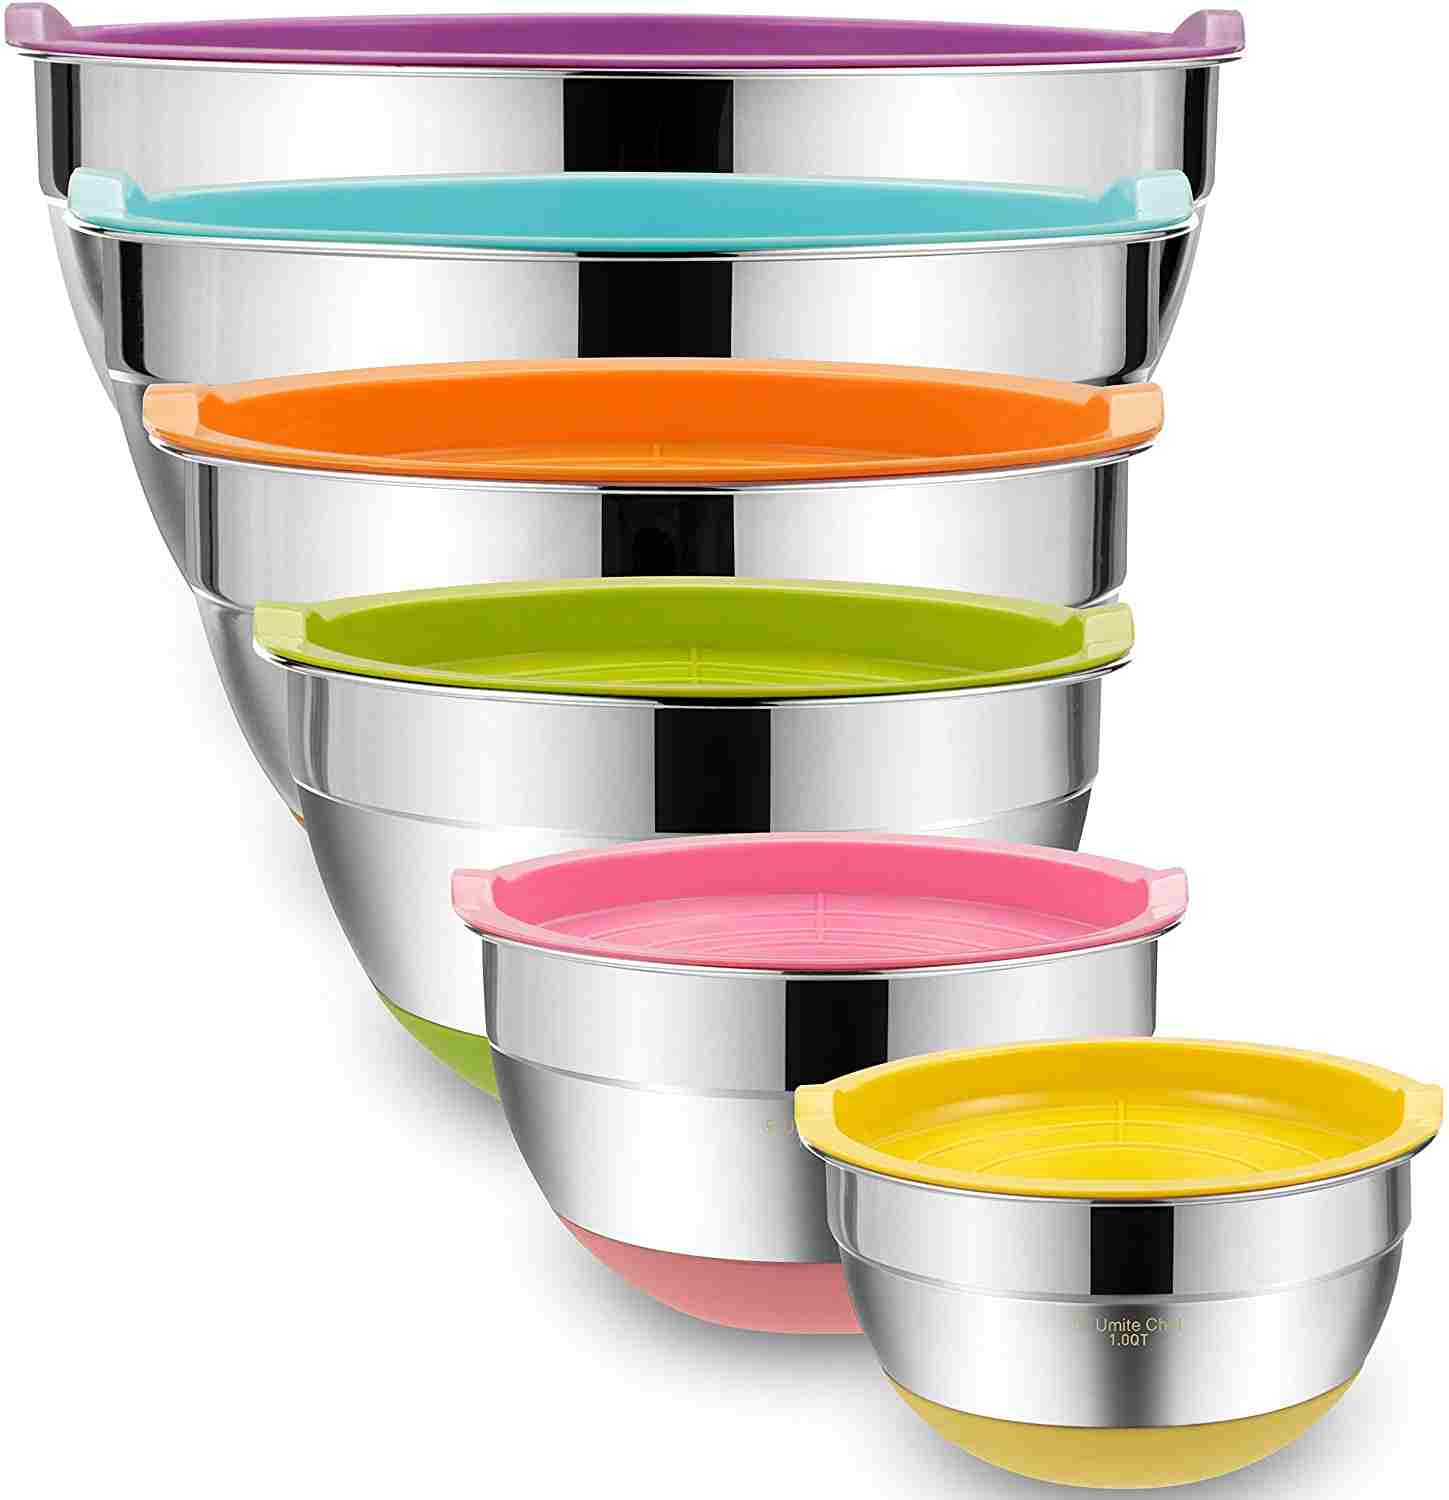 Umite Chef Stainless Steel Metal Mixing Bowls